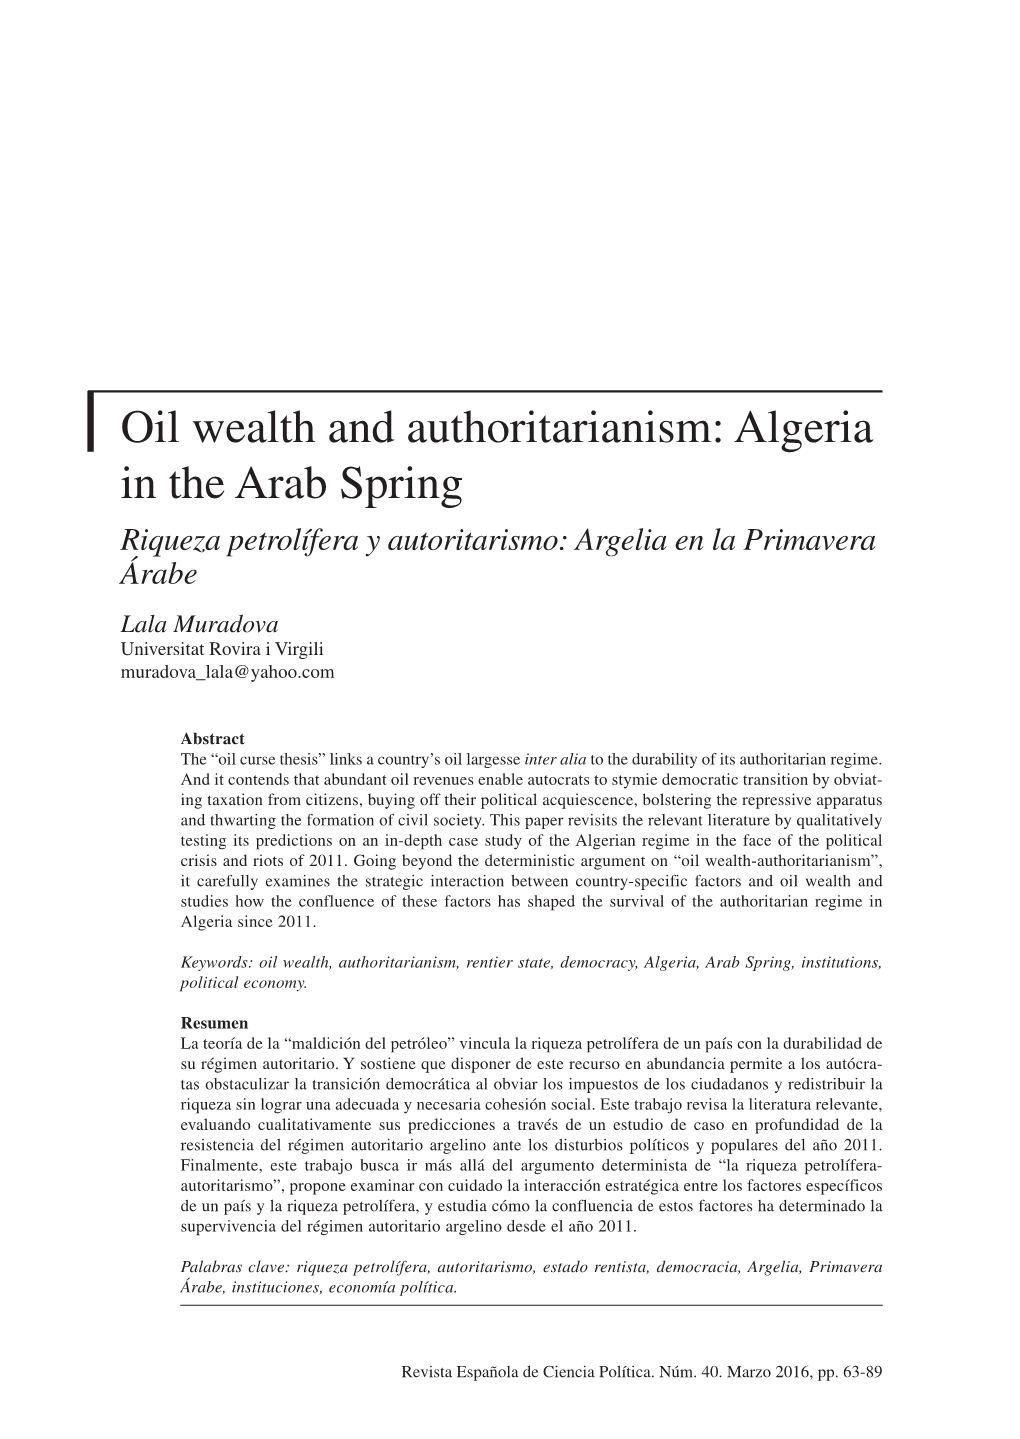 Oil Wealth and Authoritarianism: Algeria in the Arab Spring